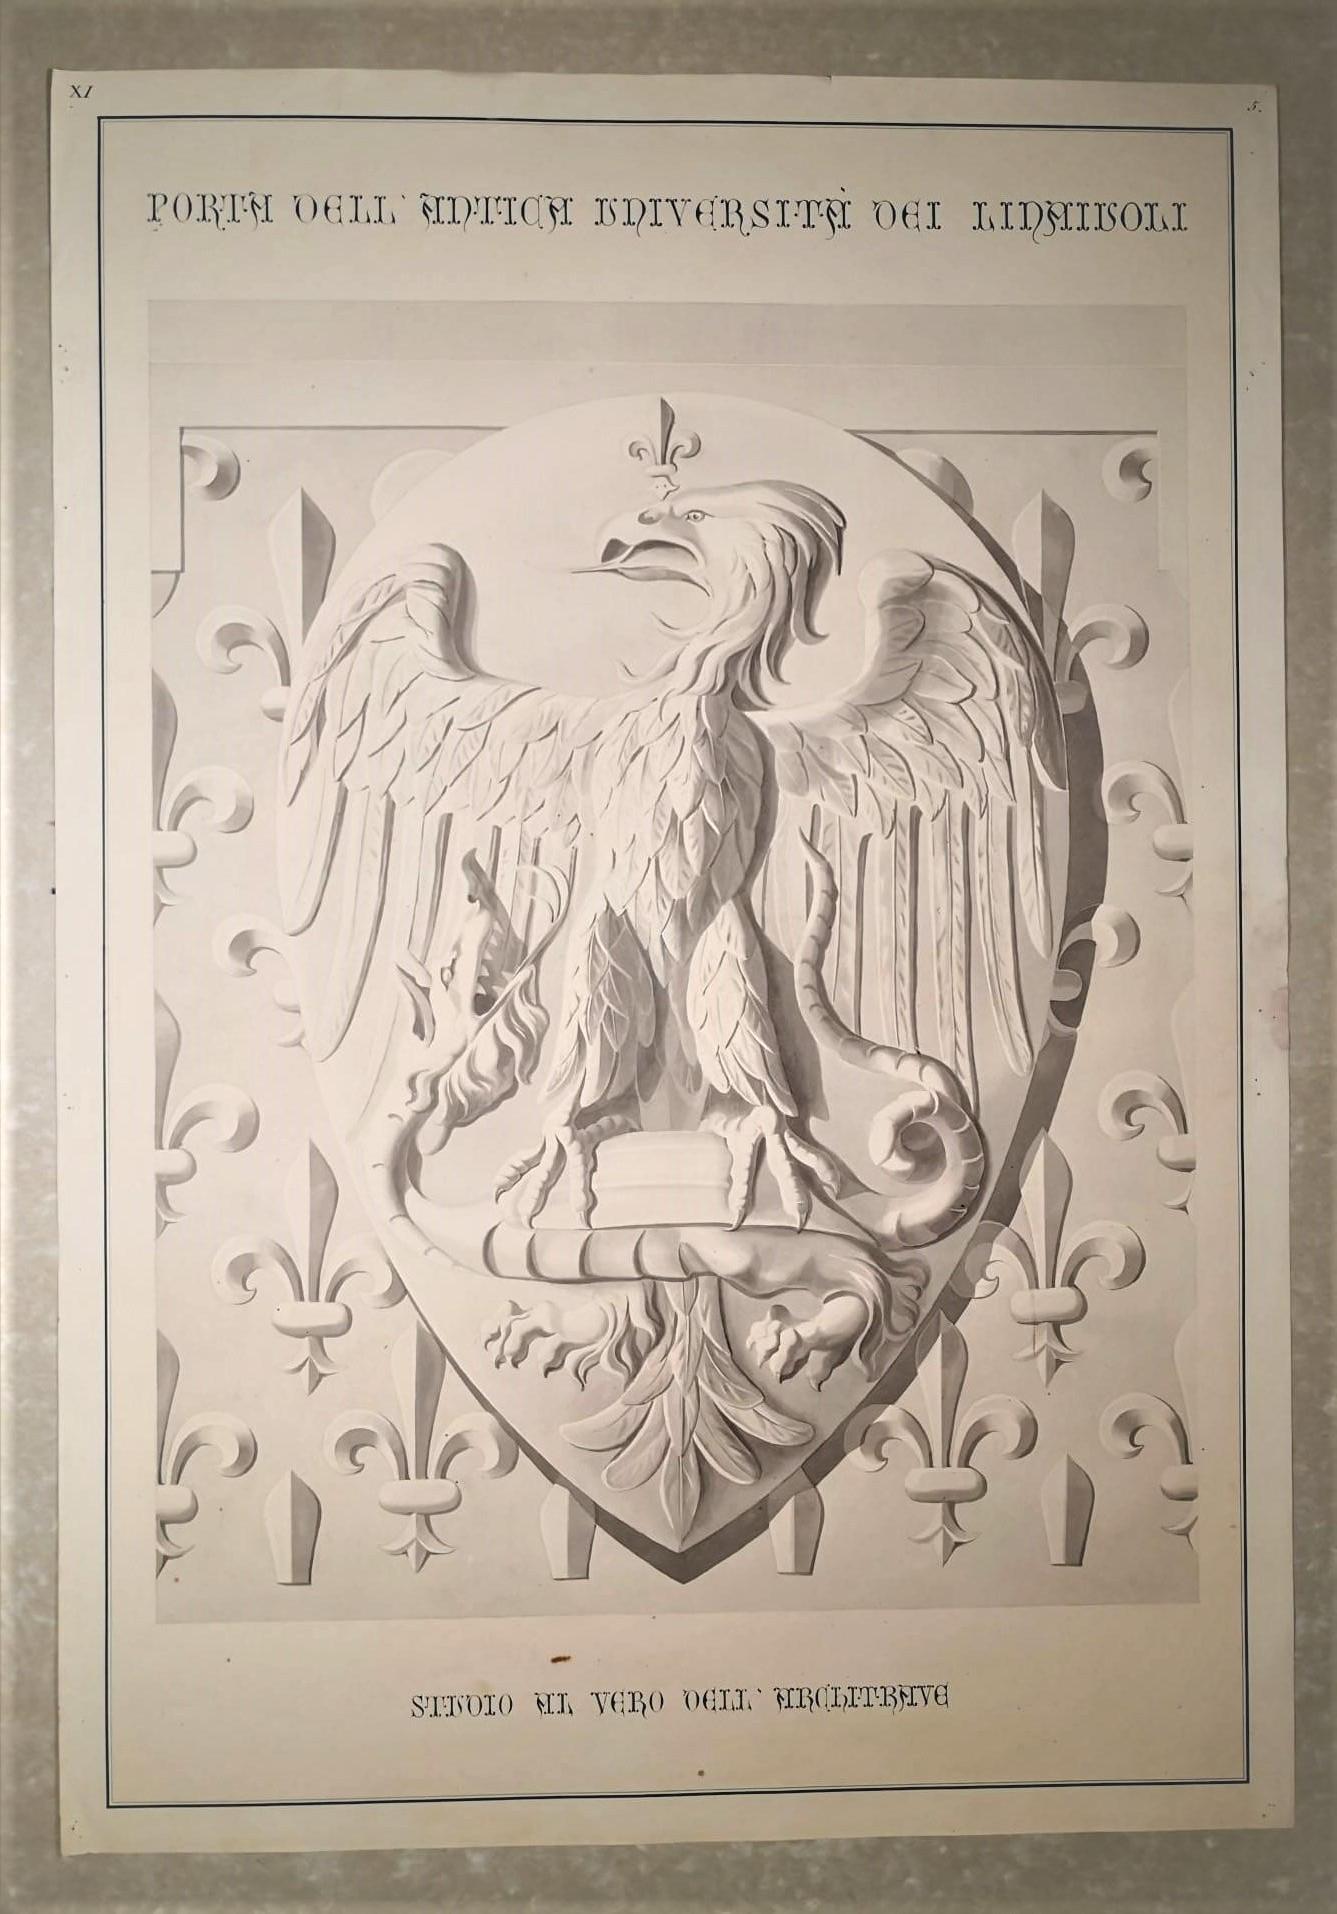 A rare extra-large print, printed on engraving paper with an antique star press and watercolored by hand representing antique Stemma of 